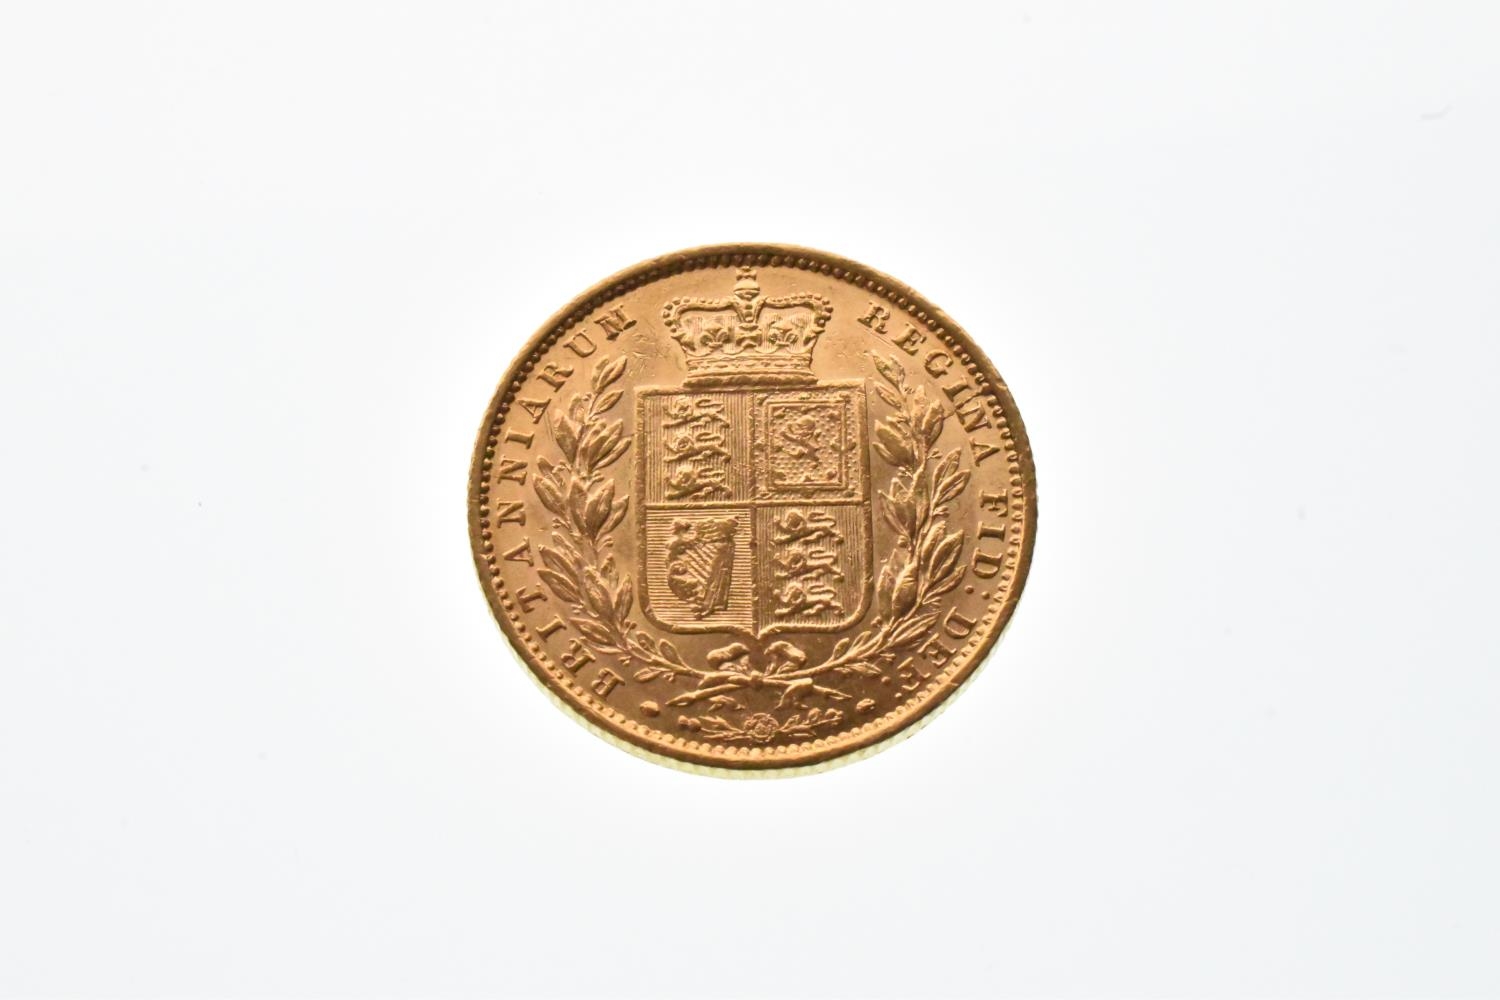 United Kingdom - Victoria (1837-1901), Gold Sovereign, 'Shield Back', dated 1855, London mint, - Image 3 of 3